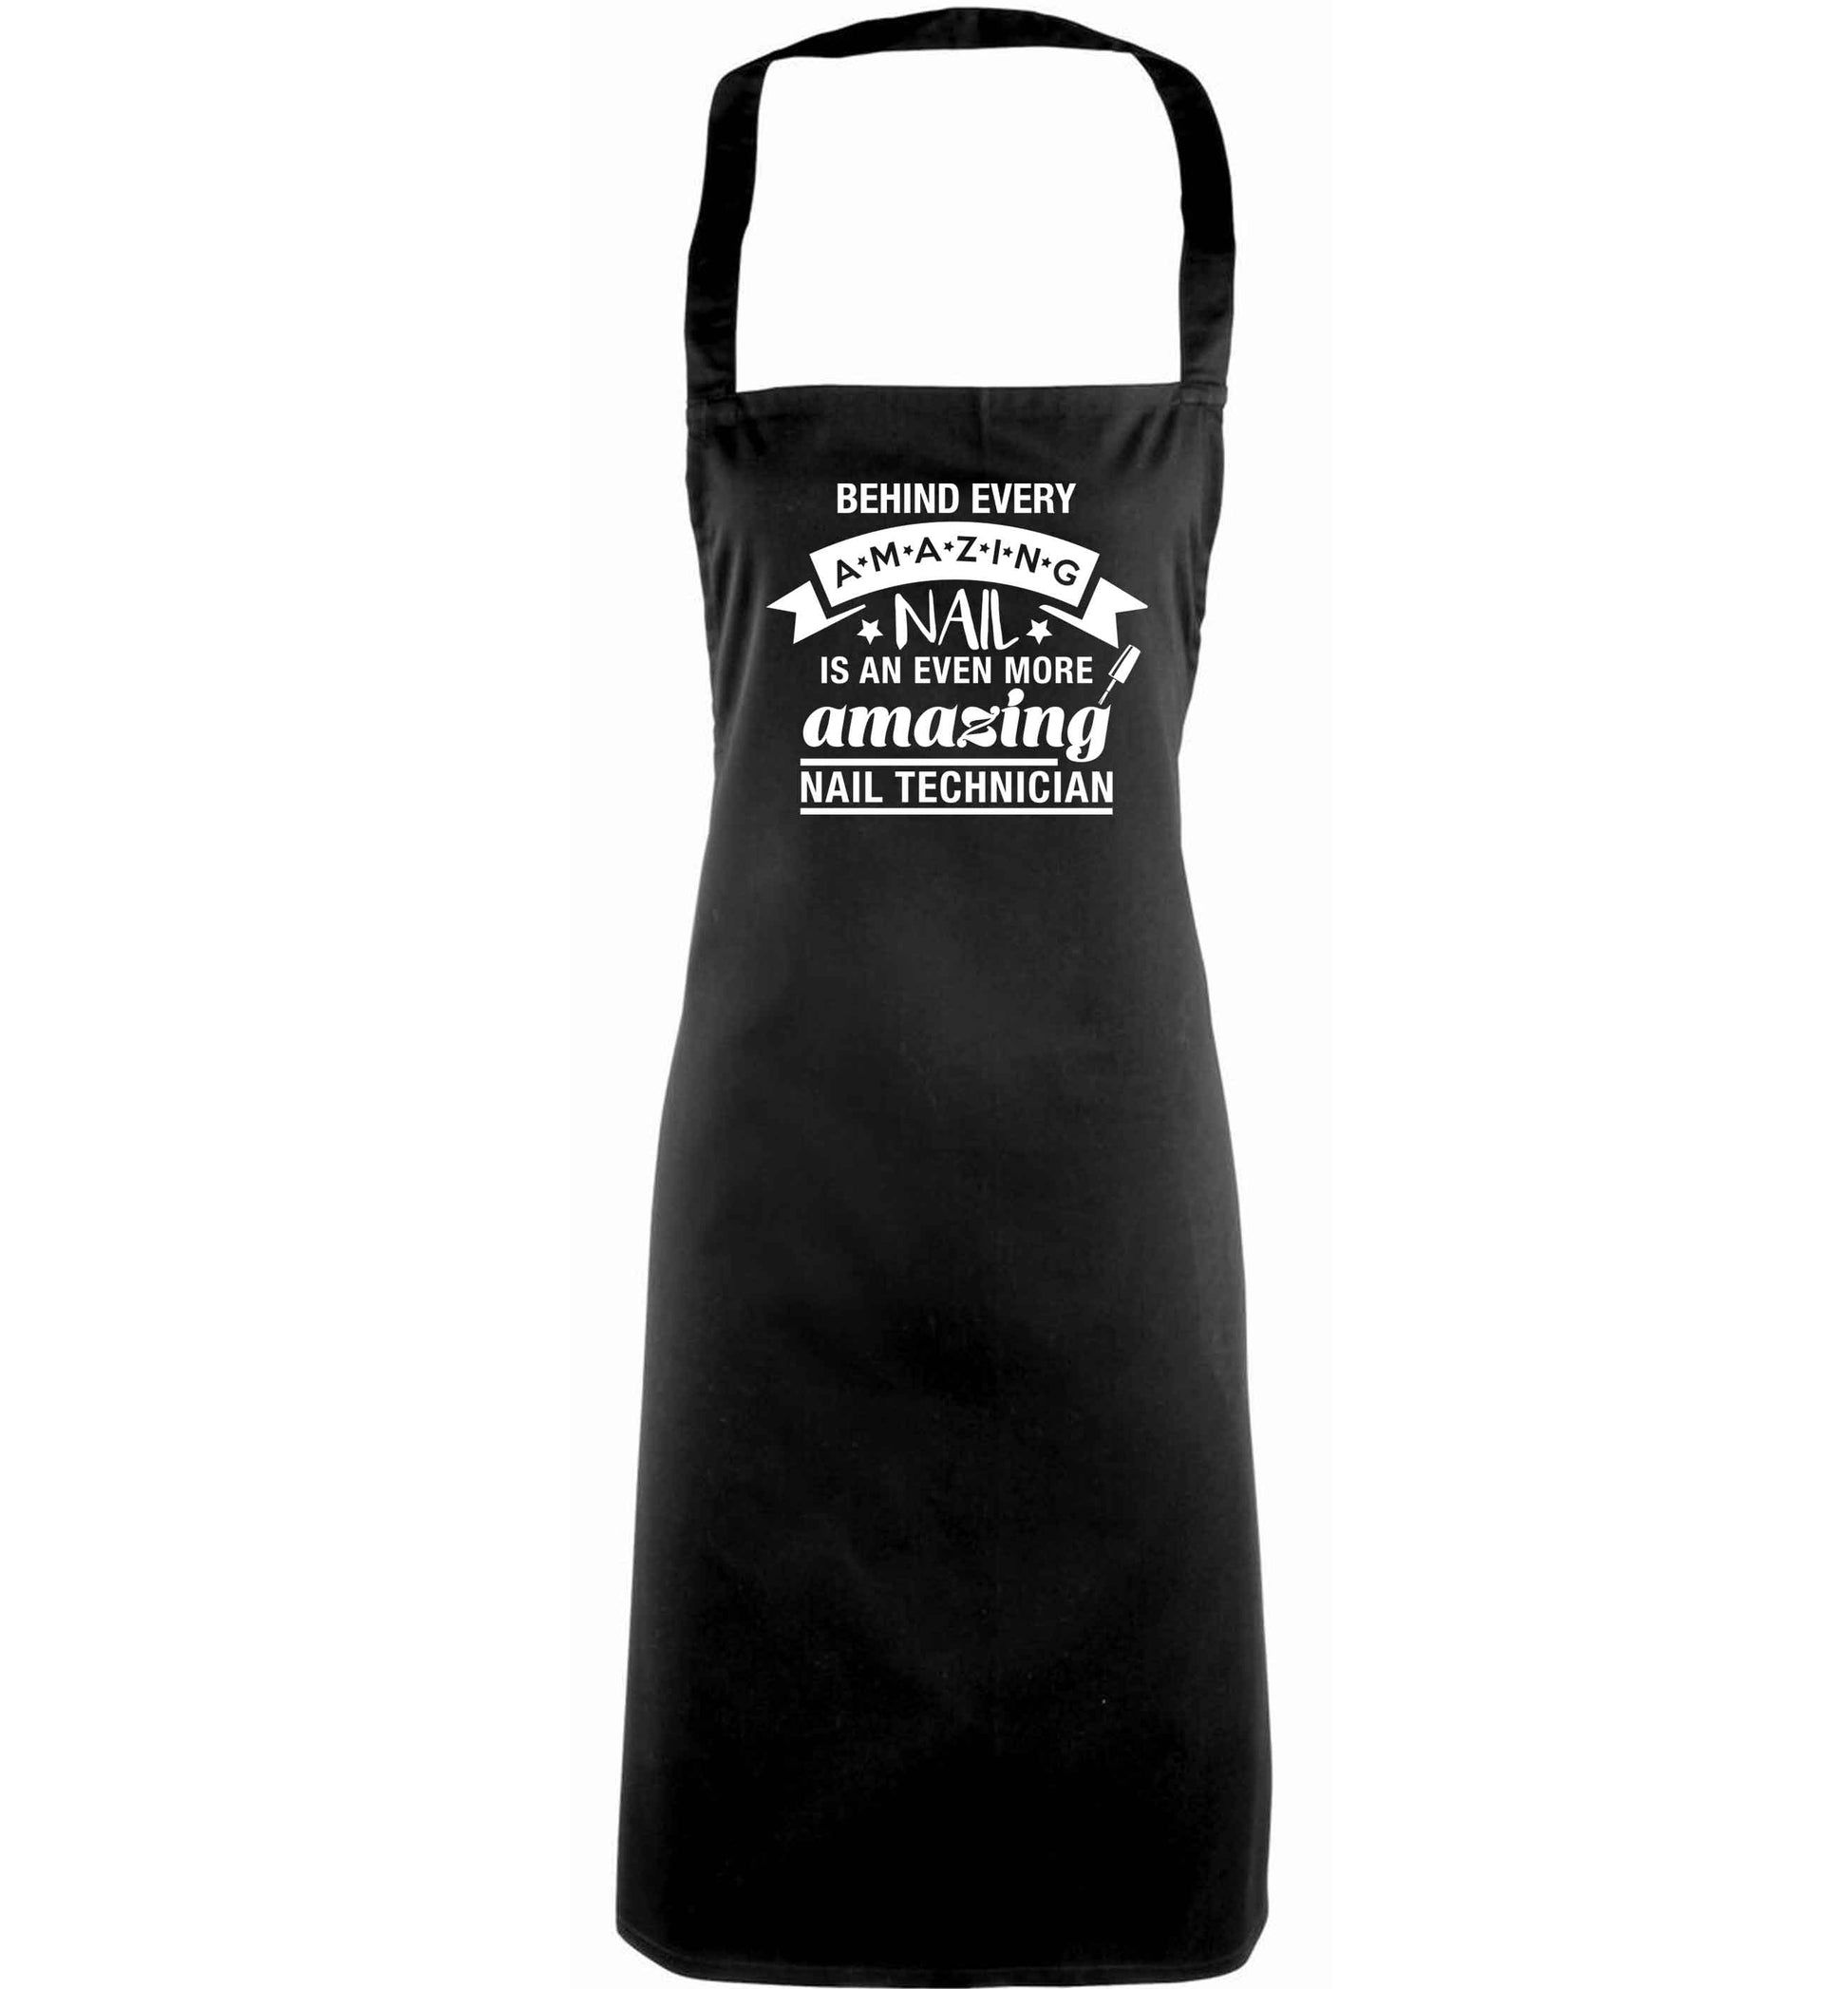 Behind every amazing nail is an even more amazing nail technician adults black apron